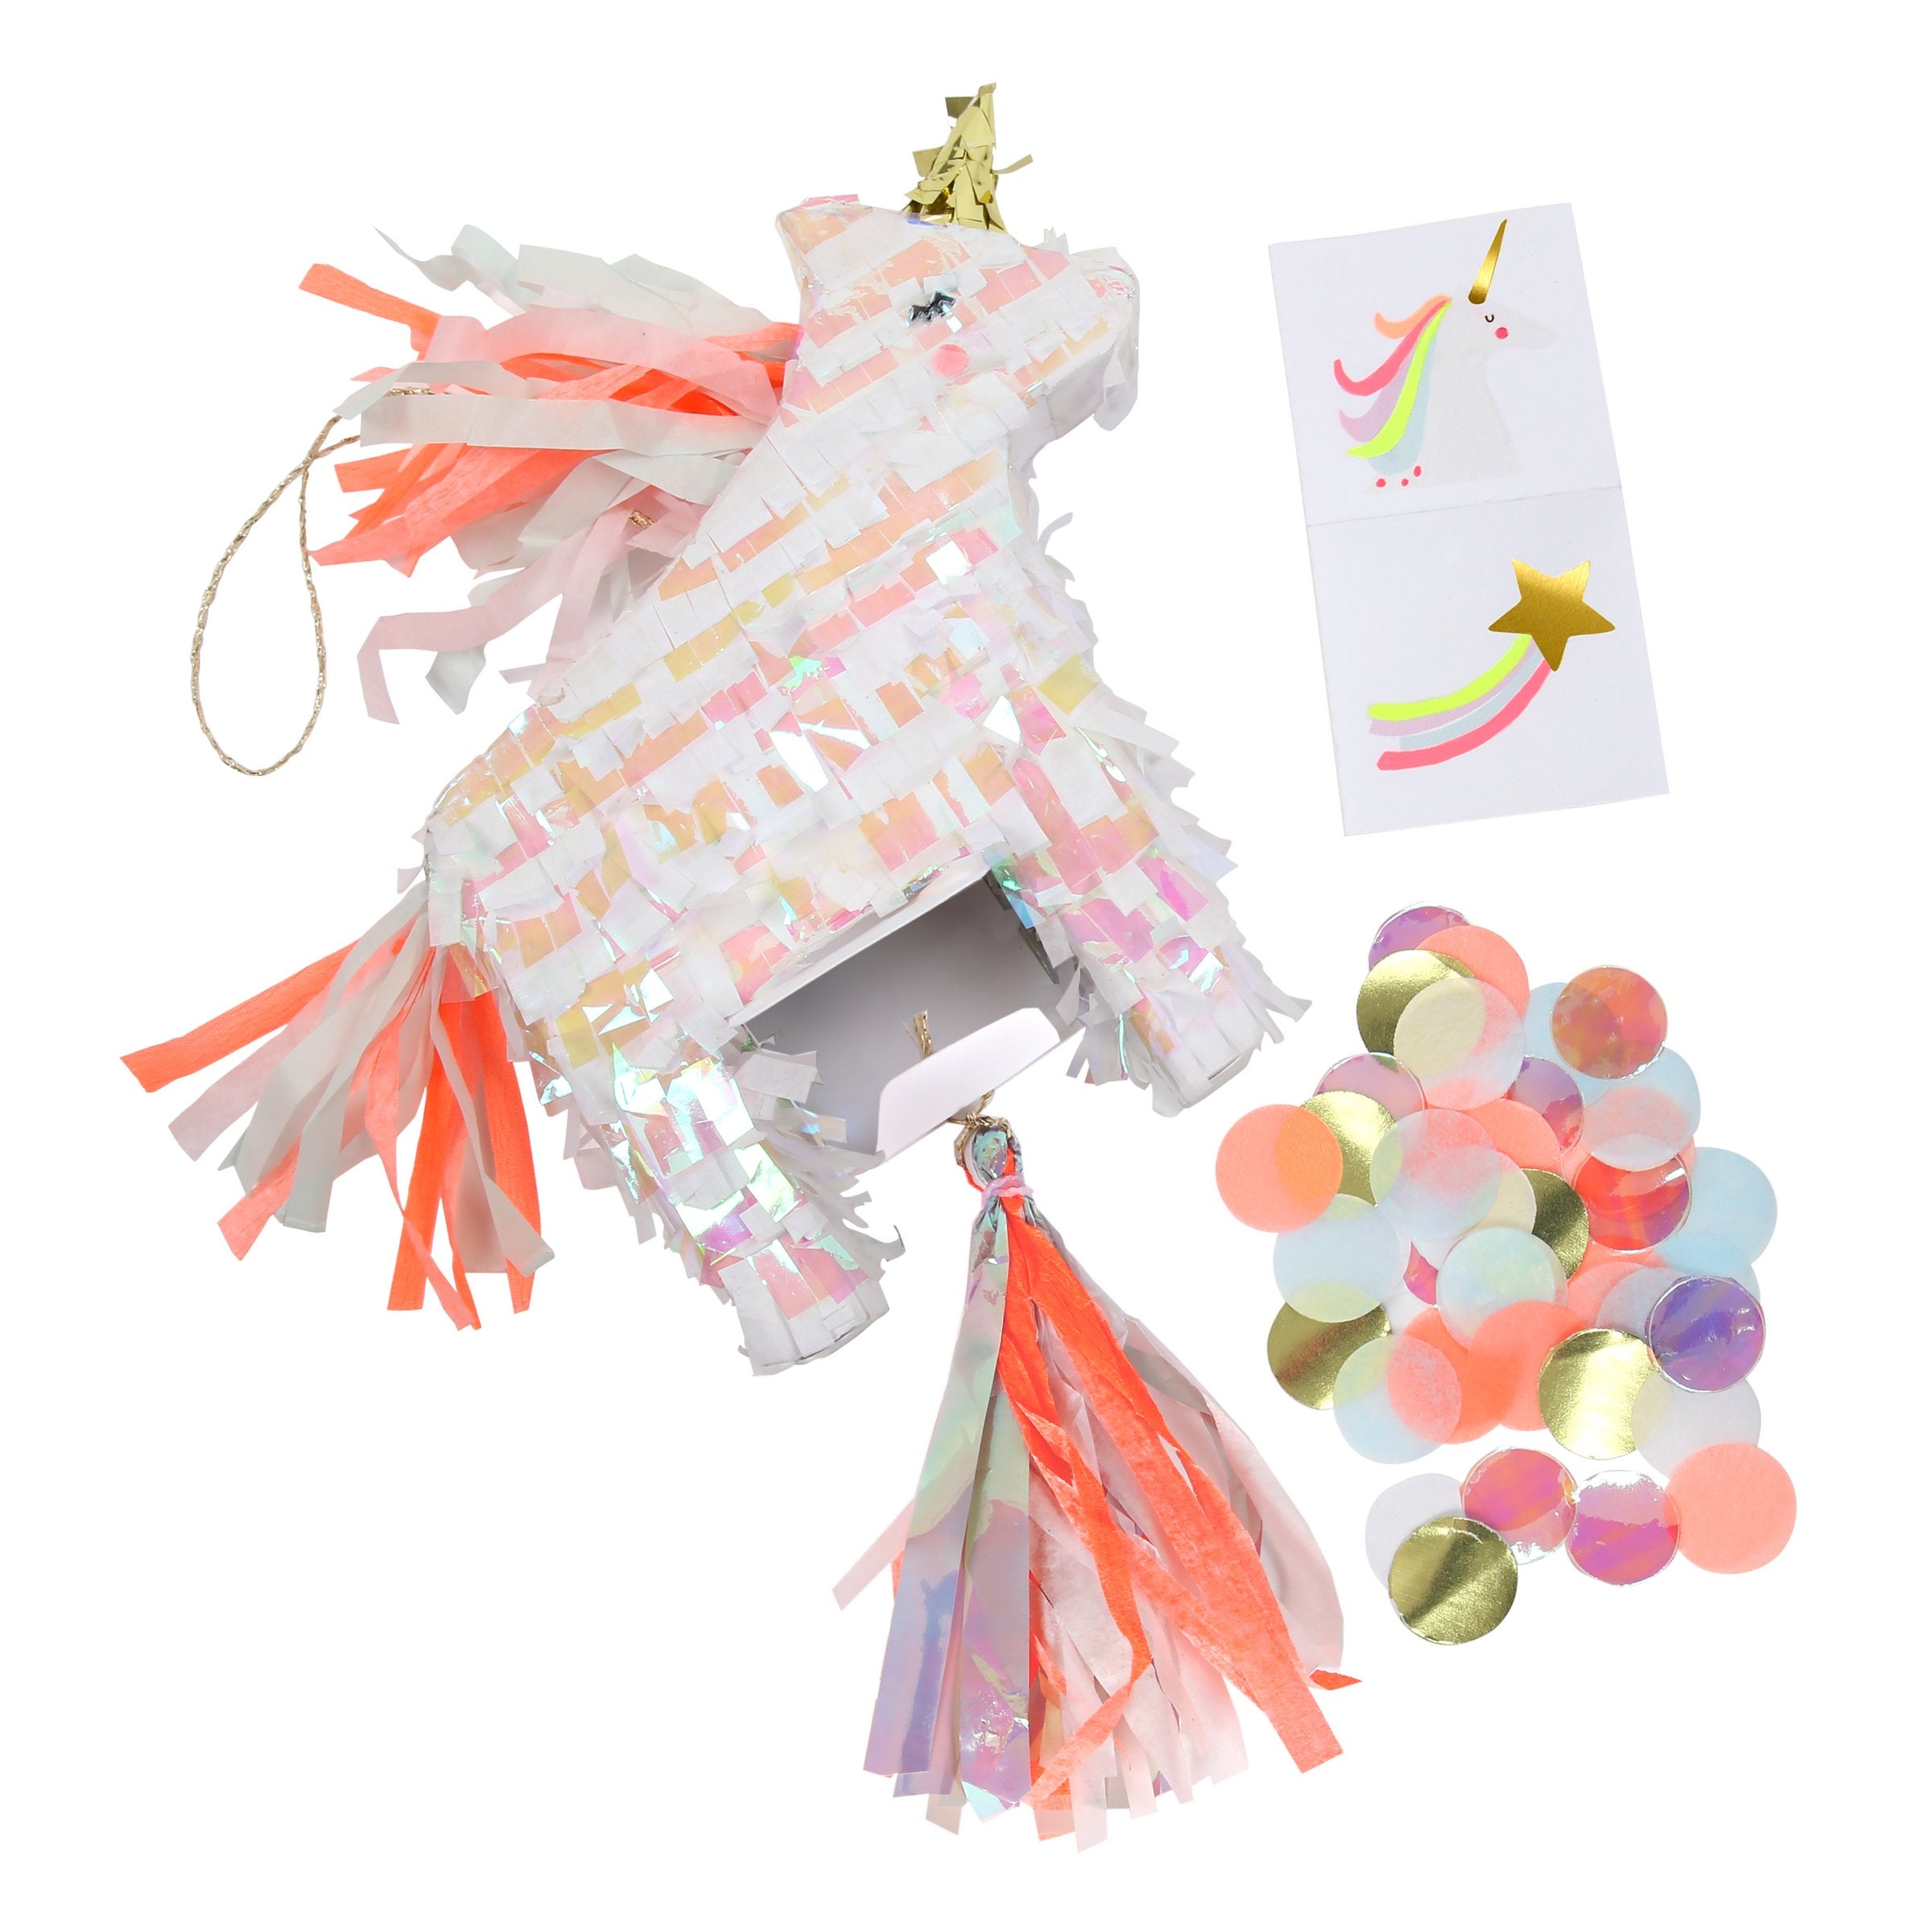 They are made with neon tassels and gold foil detail, and have 2 temporary tattoos and confetti inside.